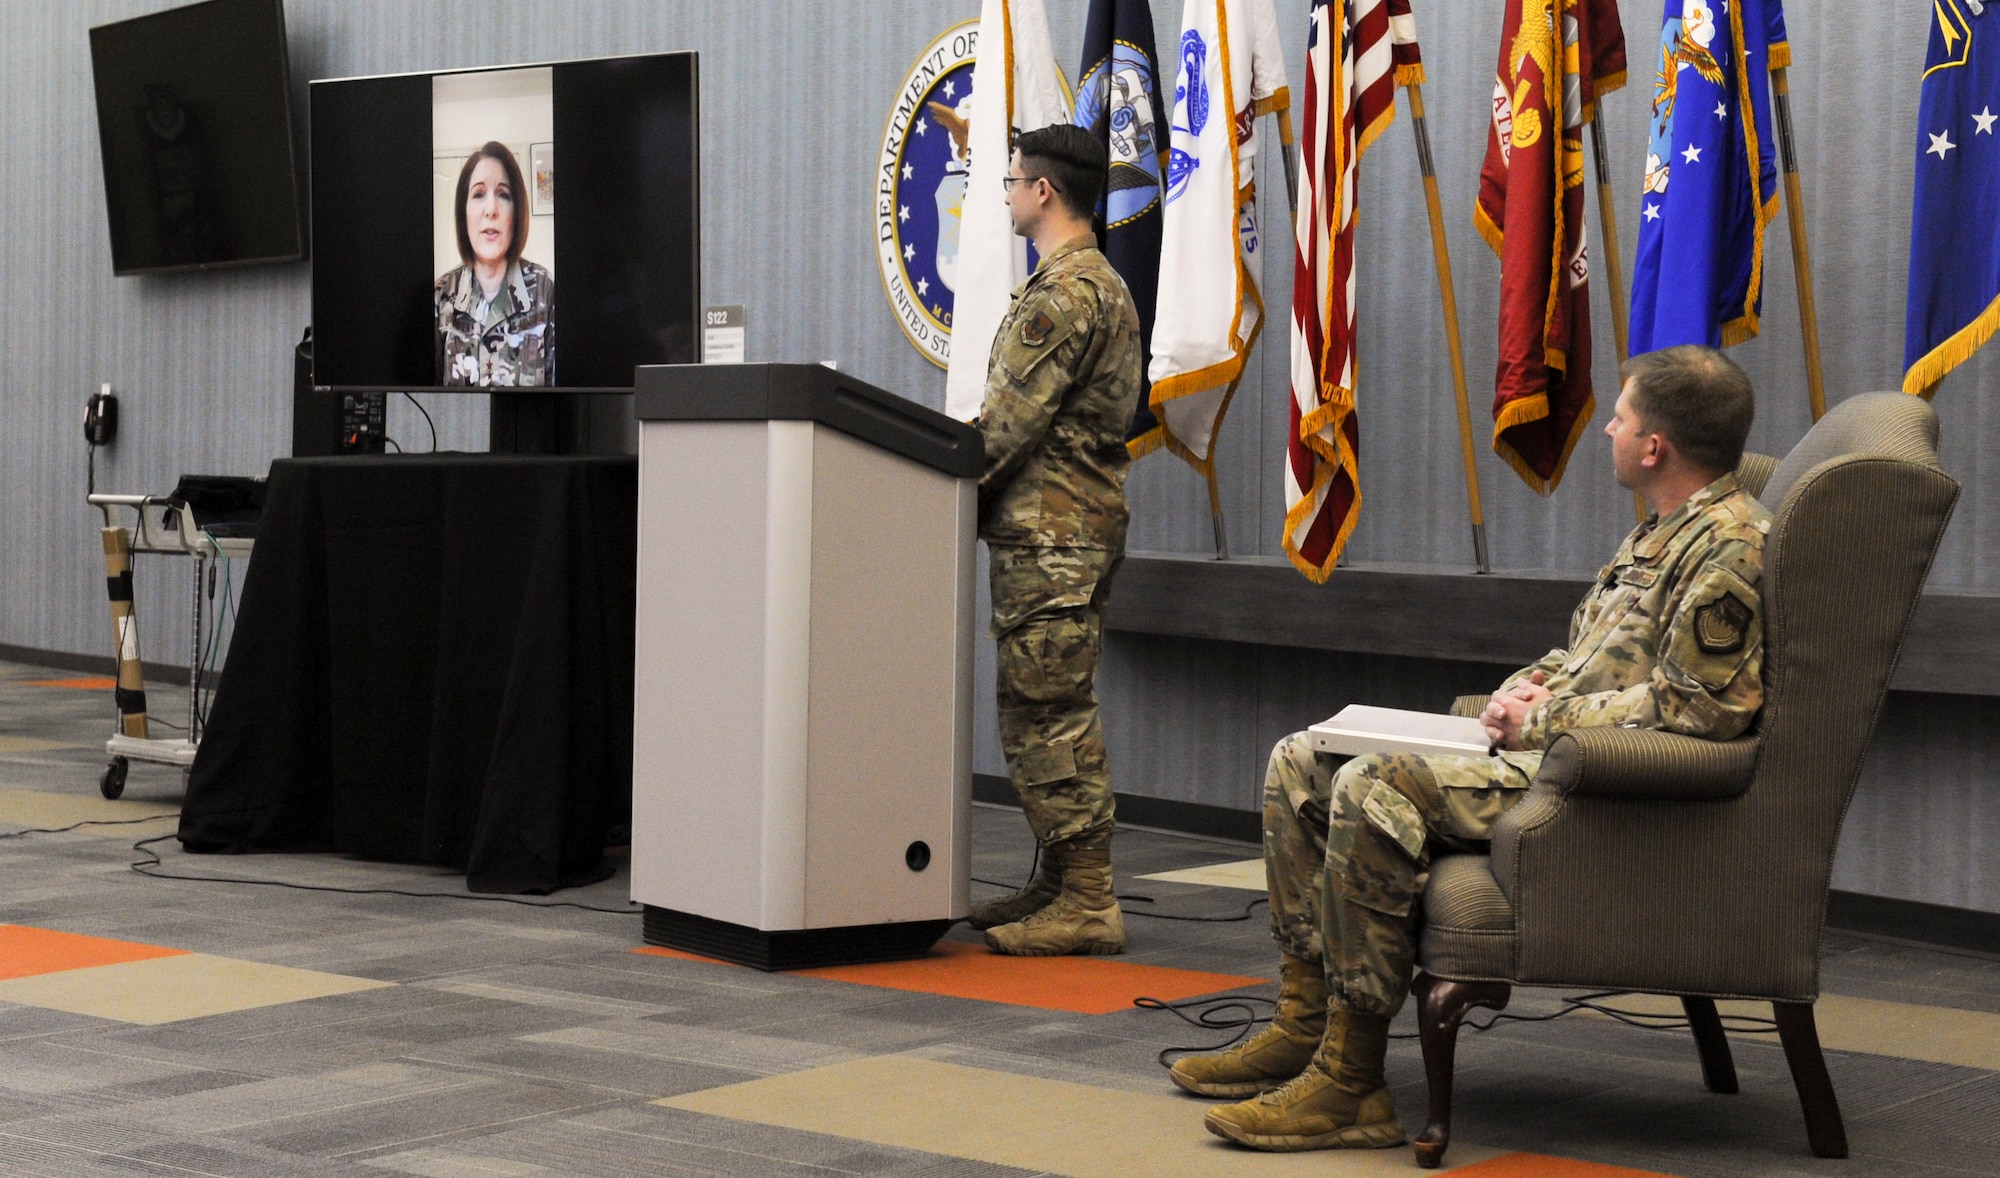 Lt. Gen. Mary O’Brien, Deputy Chief of Staff for Intelligence, Surveillance, Reconnaissance and Cyber Effects Operations, makes remarks on-screen during a May 8, 2020, farewell ceremony for Col. Parker Wright (seated), commander, National Air and Space Intelligence Center. Steering away from the typical change of command activities because of the ongoing COVID-19 response, the ceremony was instead streamed live to the workforce through the Department of Defense’s Commercial Virtual Remote Environment. Wright, who has been confirmed for appointment to the rank of brigadier general, will be leaving NASIC to go to the Air Staff where he will serve as Director of ISR Operations. (U.S. Air Force photo by Senior Airman Samuel Earick)